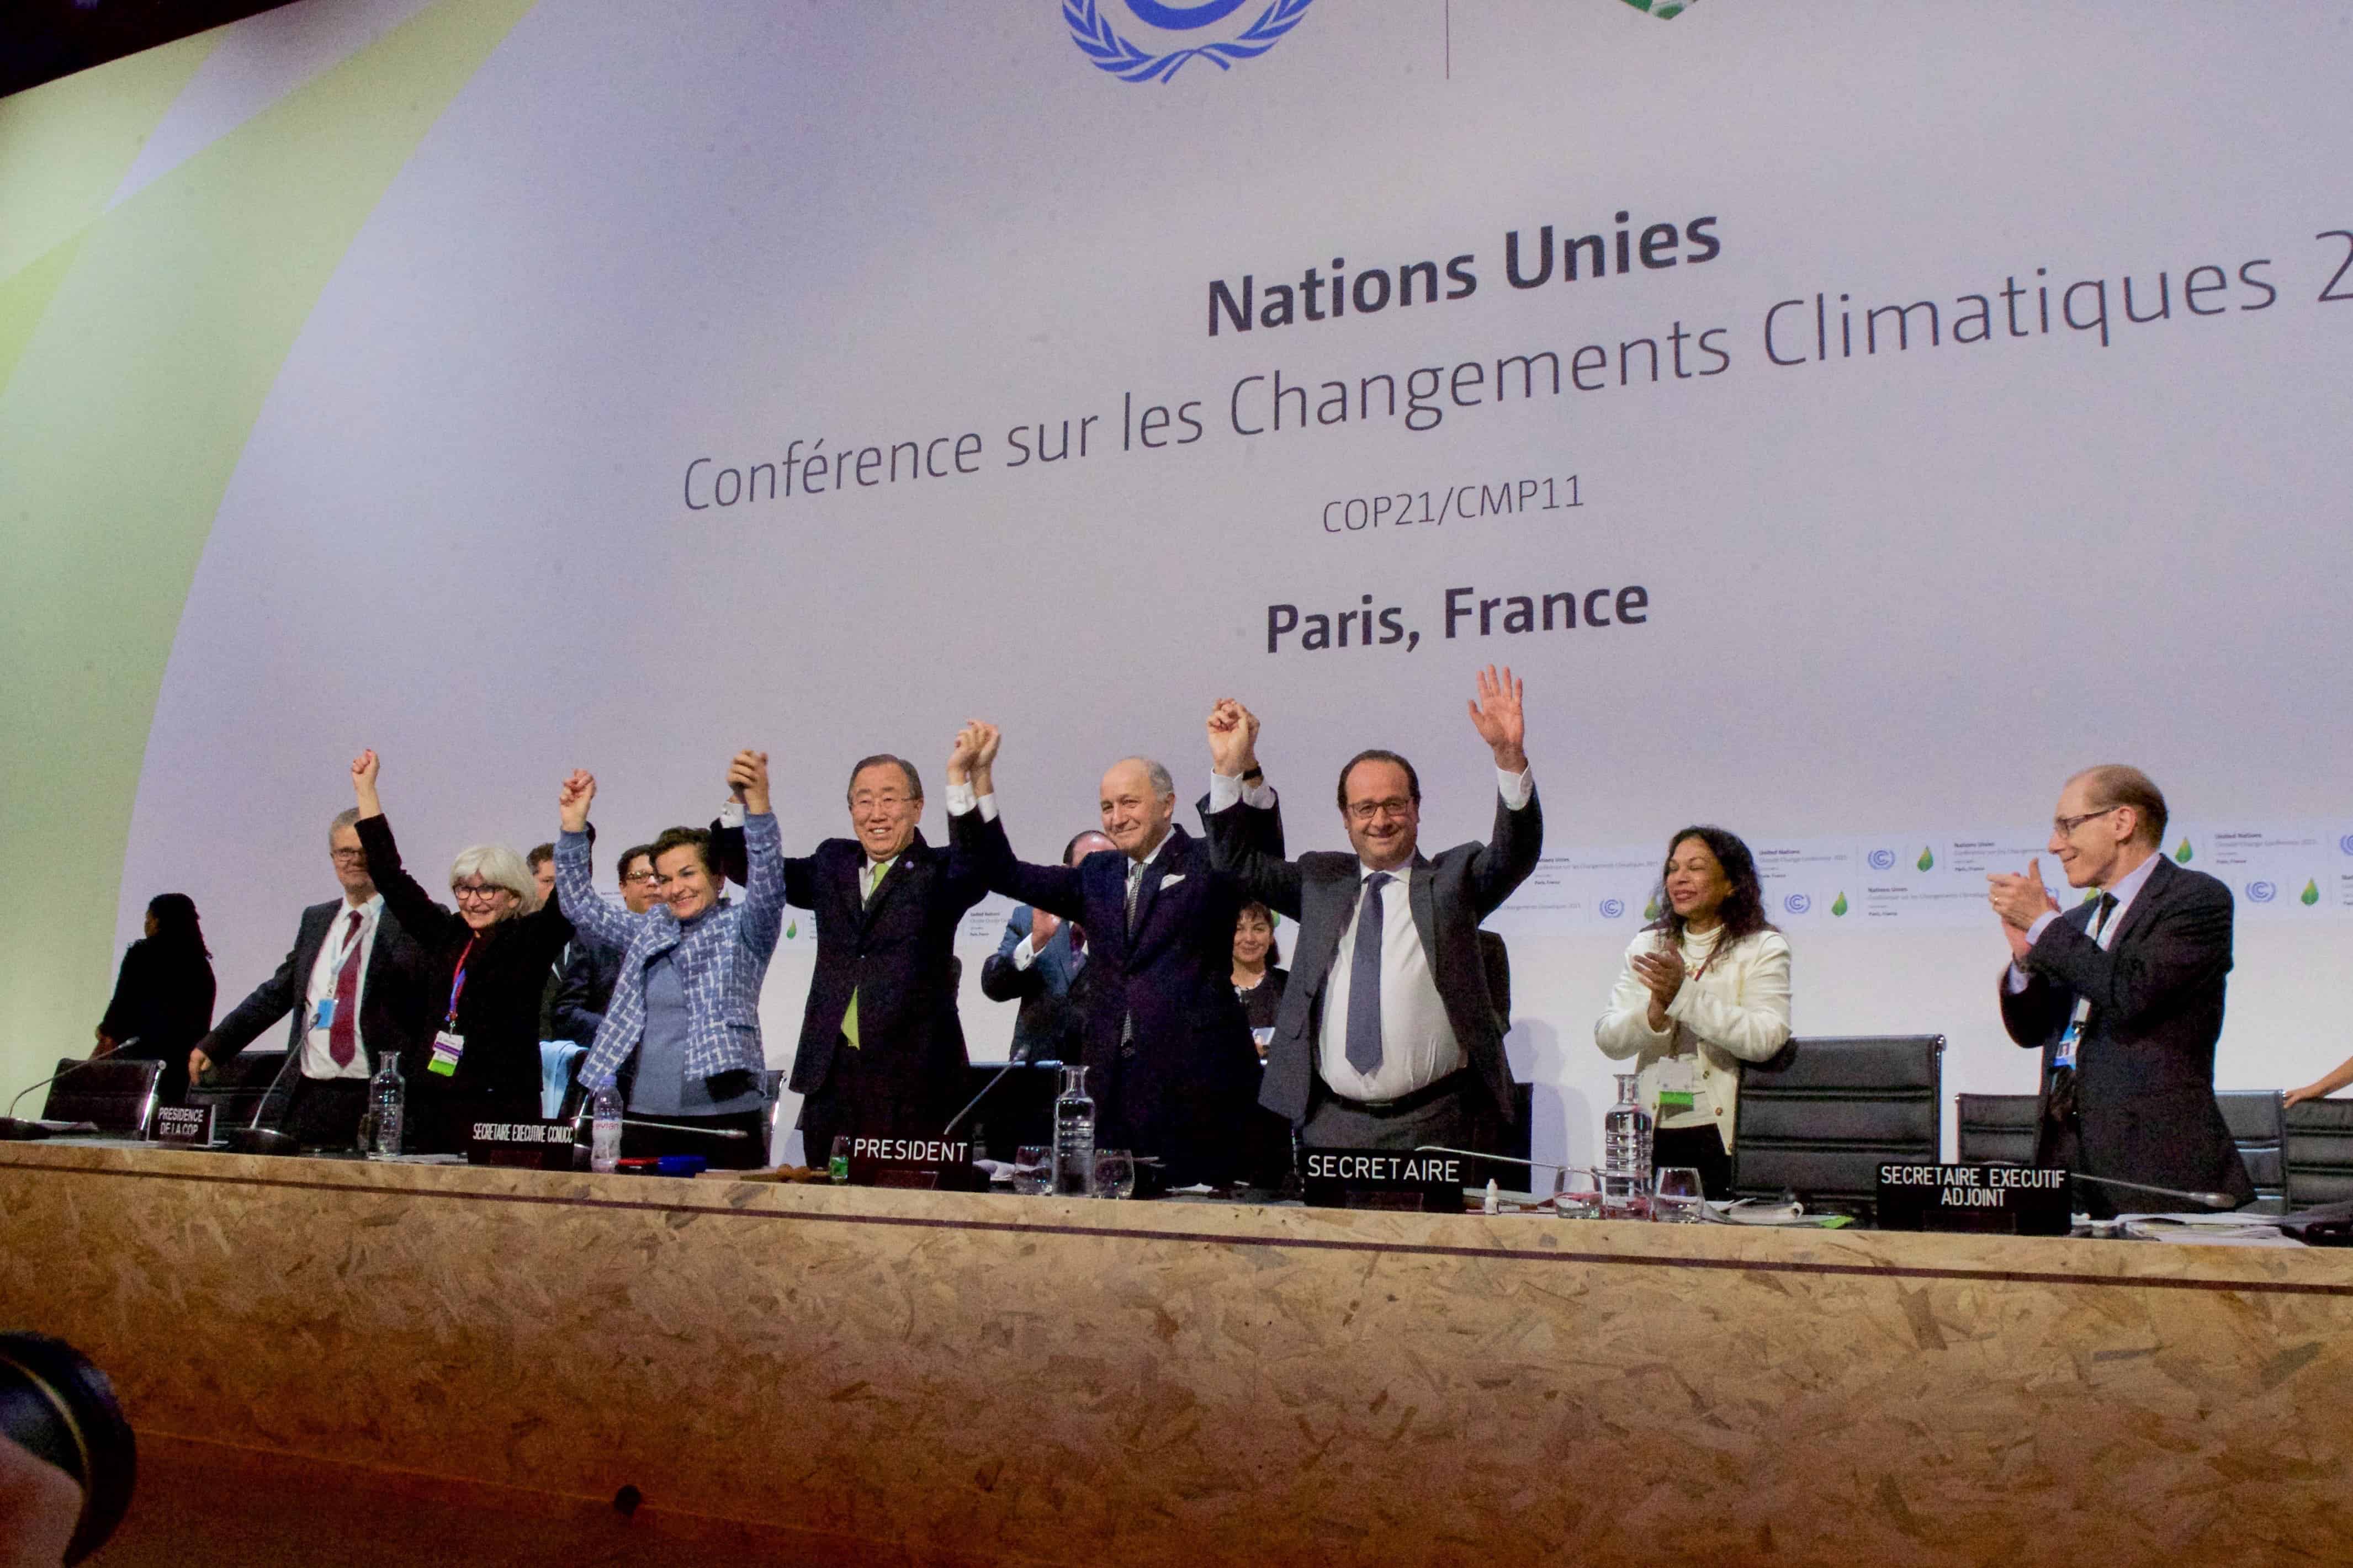 Heads of state cheer after the Paris Climate Change Agreement was signed at COP21, 2015, by 197 parties. Credit: Wikipedia